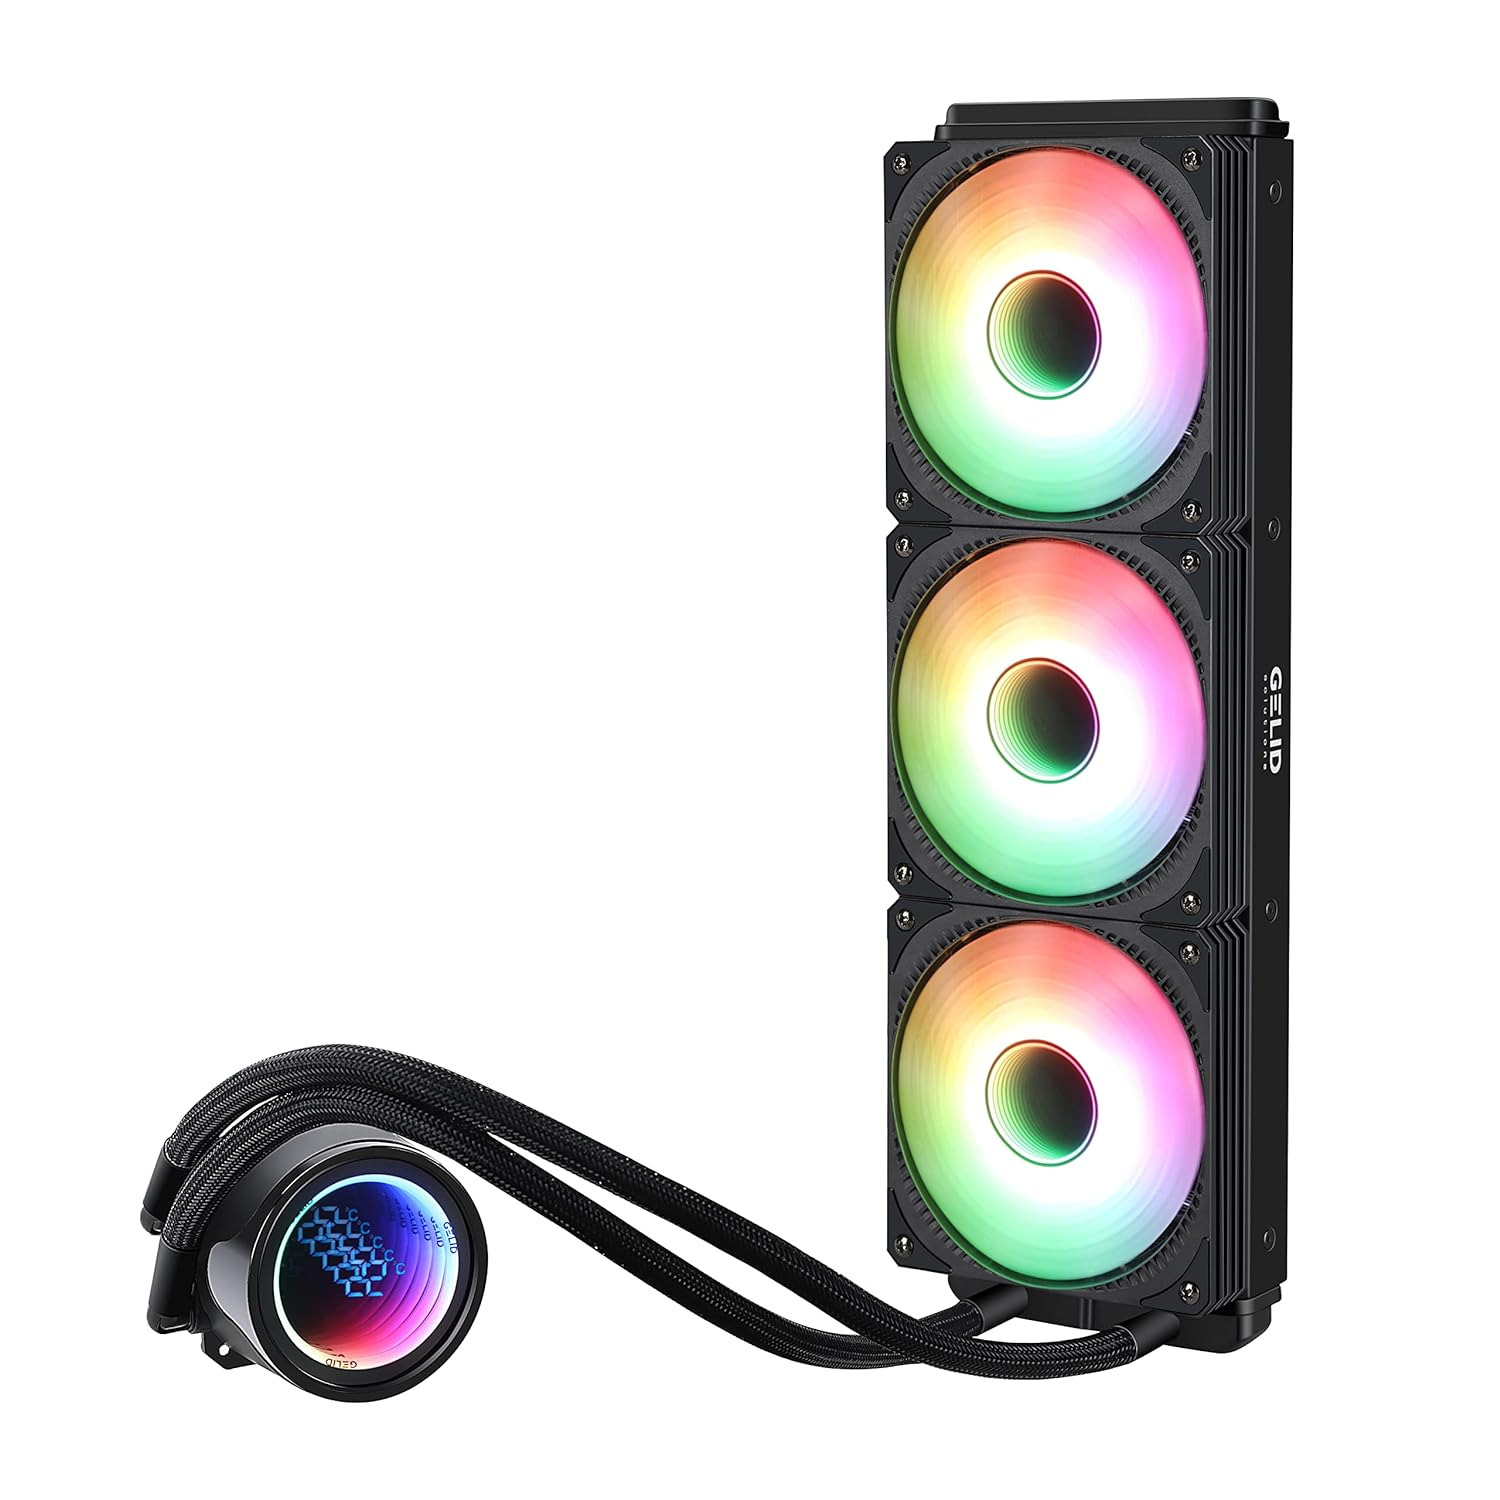 Liquid 360 – All-In-One CPU AIO Water Cooler with 3X 120Mm RGB Fan, 750-1800 RPM